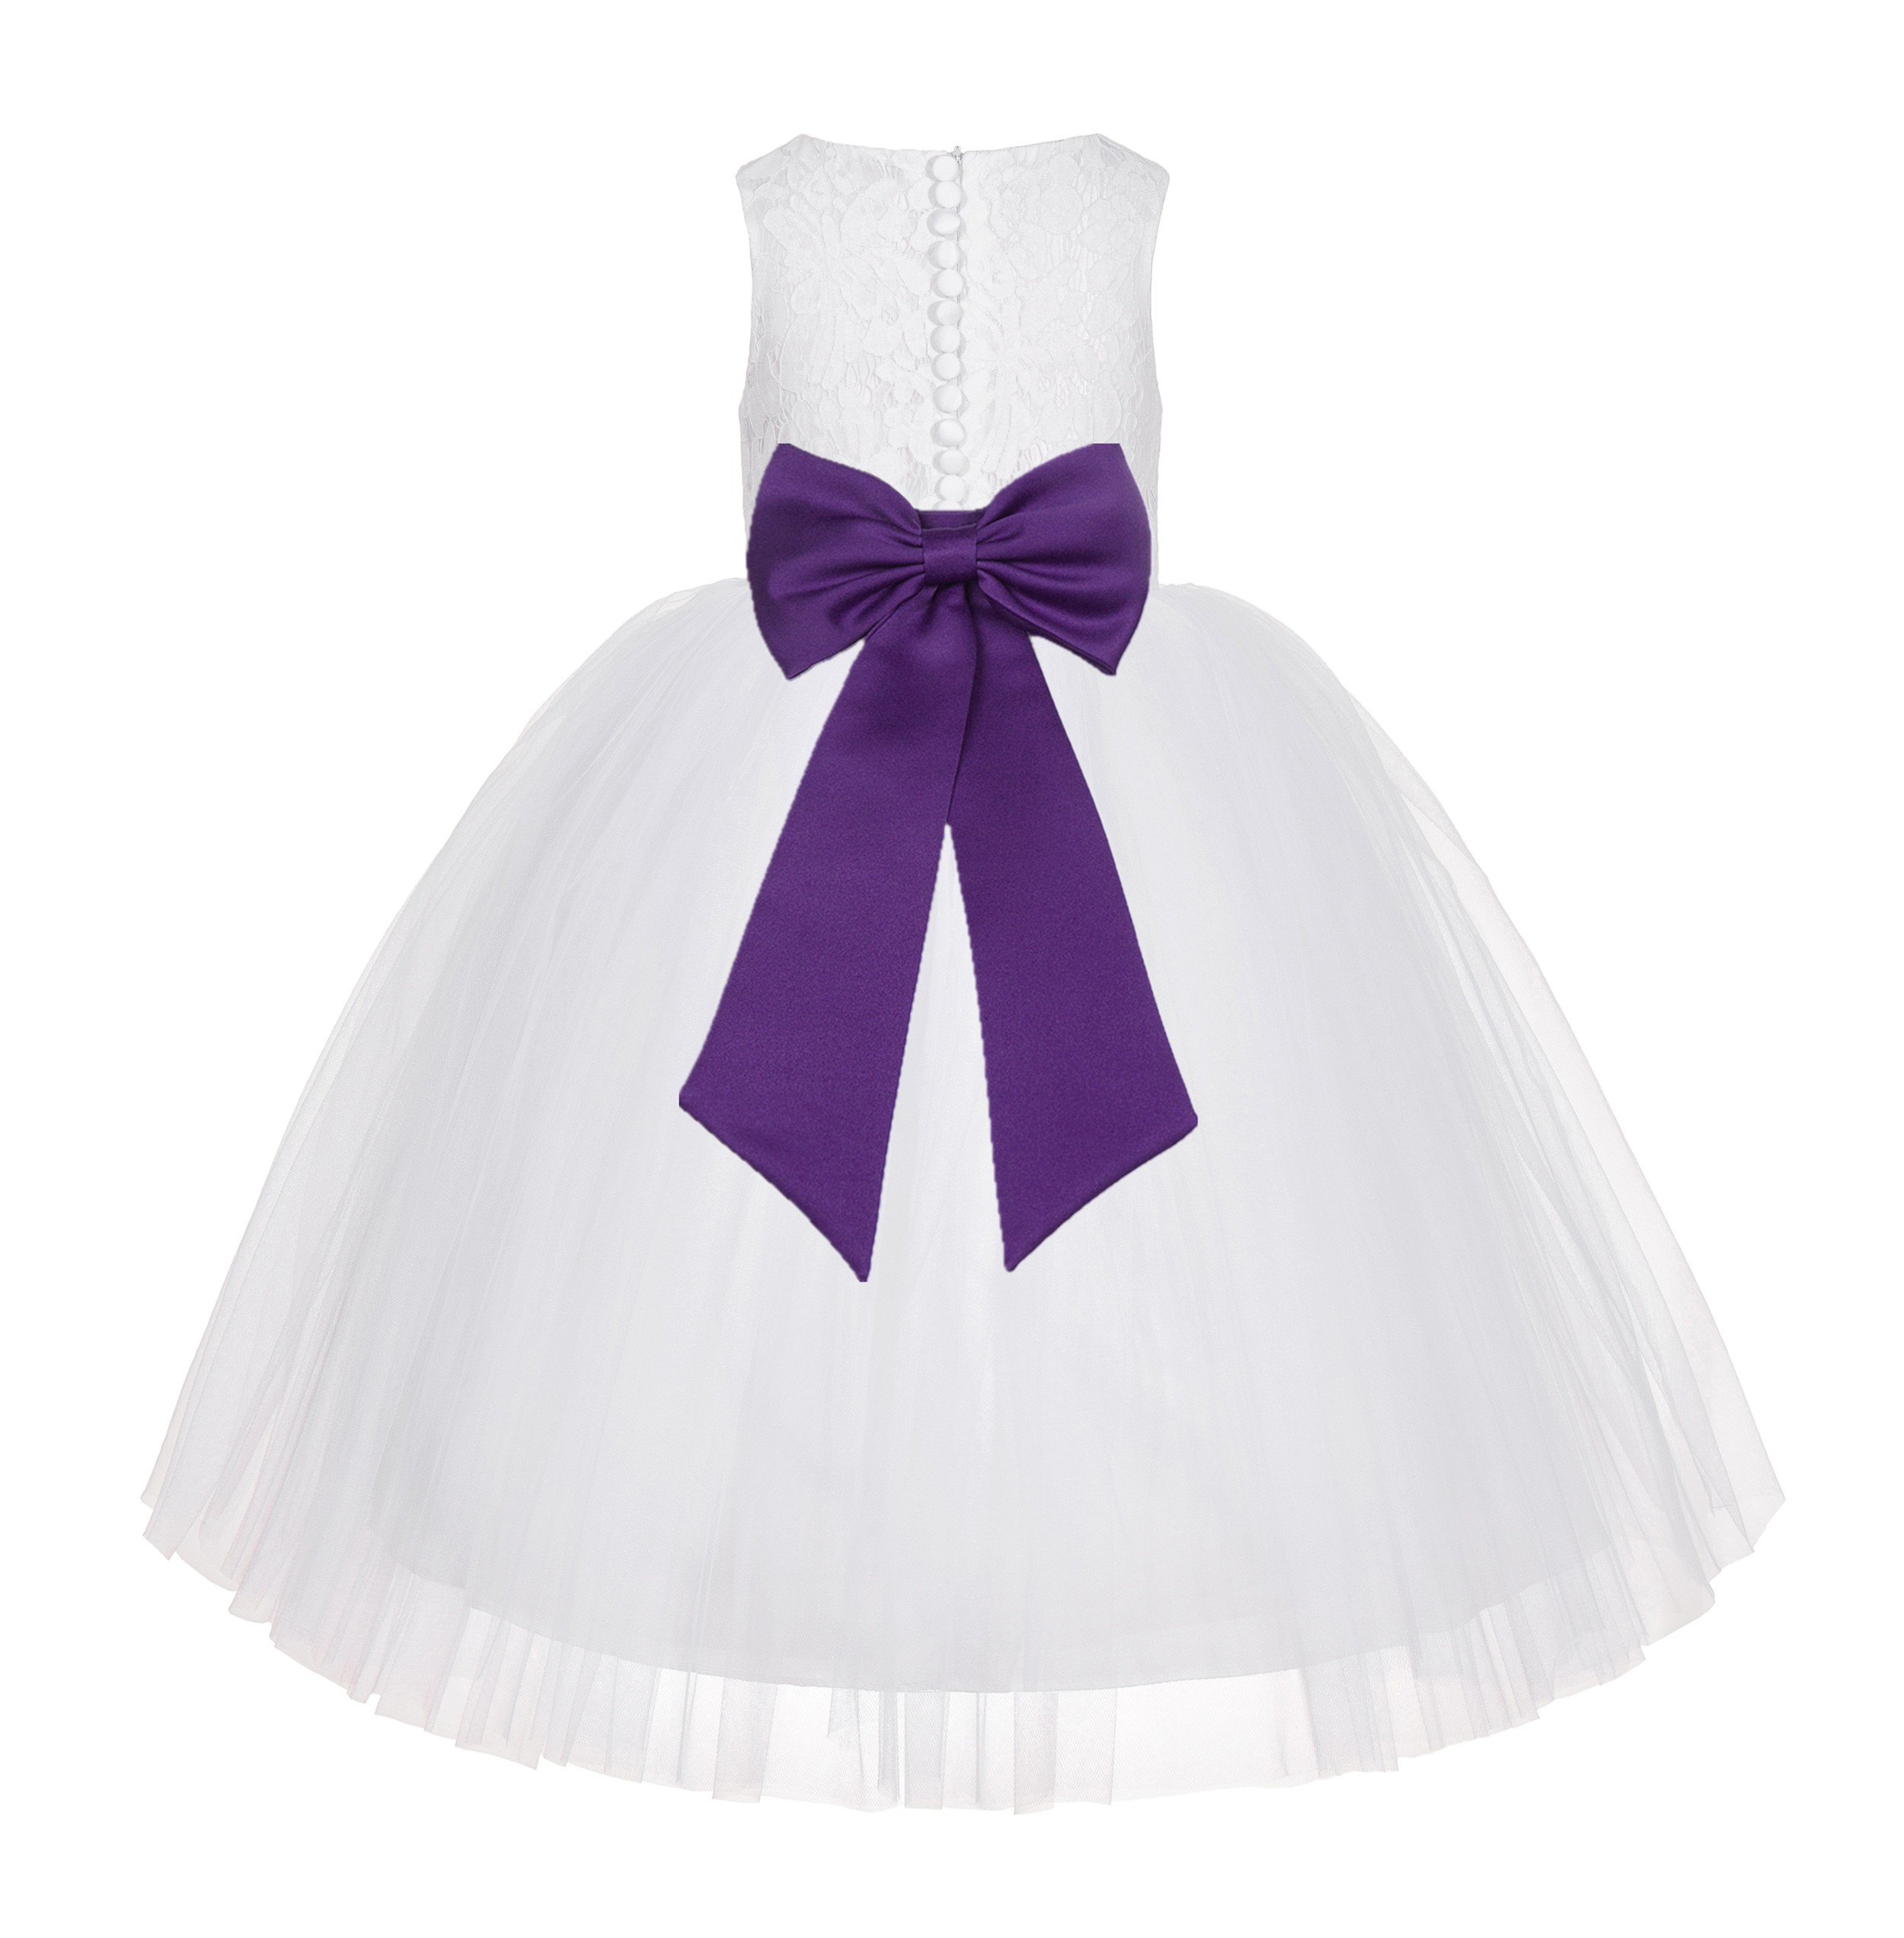 White / Purple Floral Lace Flower Girl Dress White Ball Gown Lg7